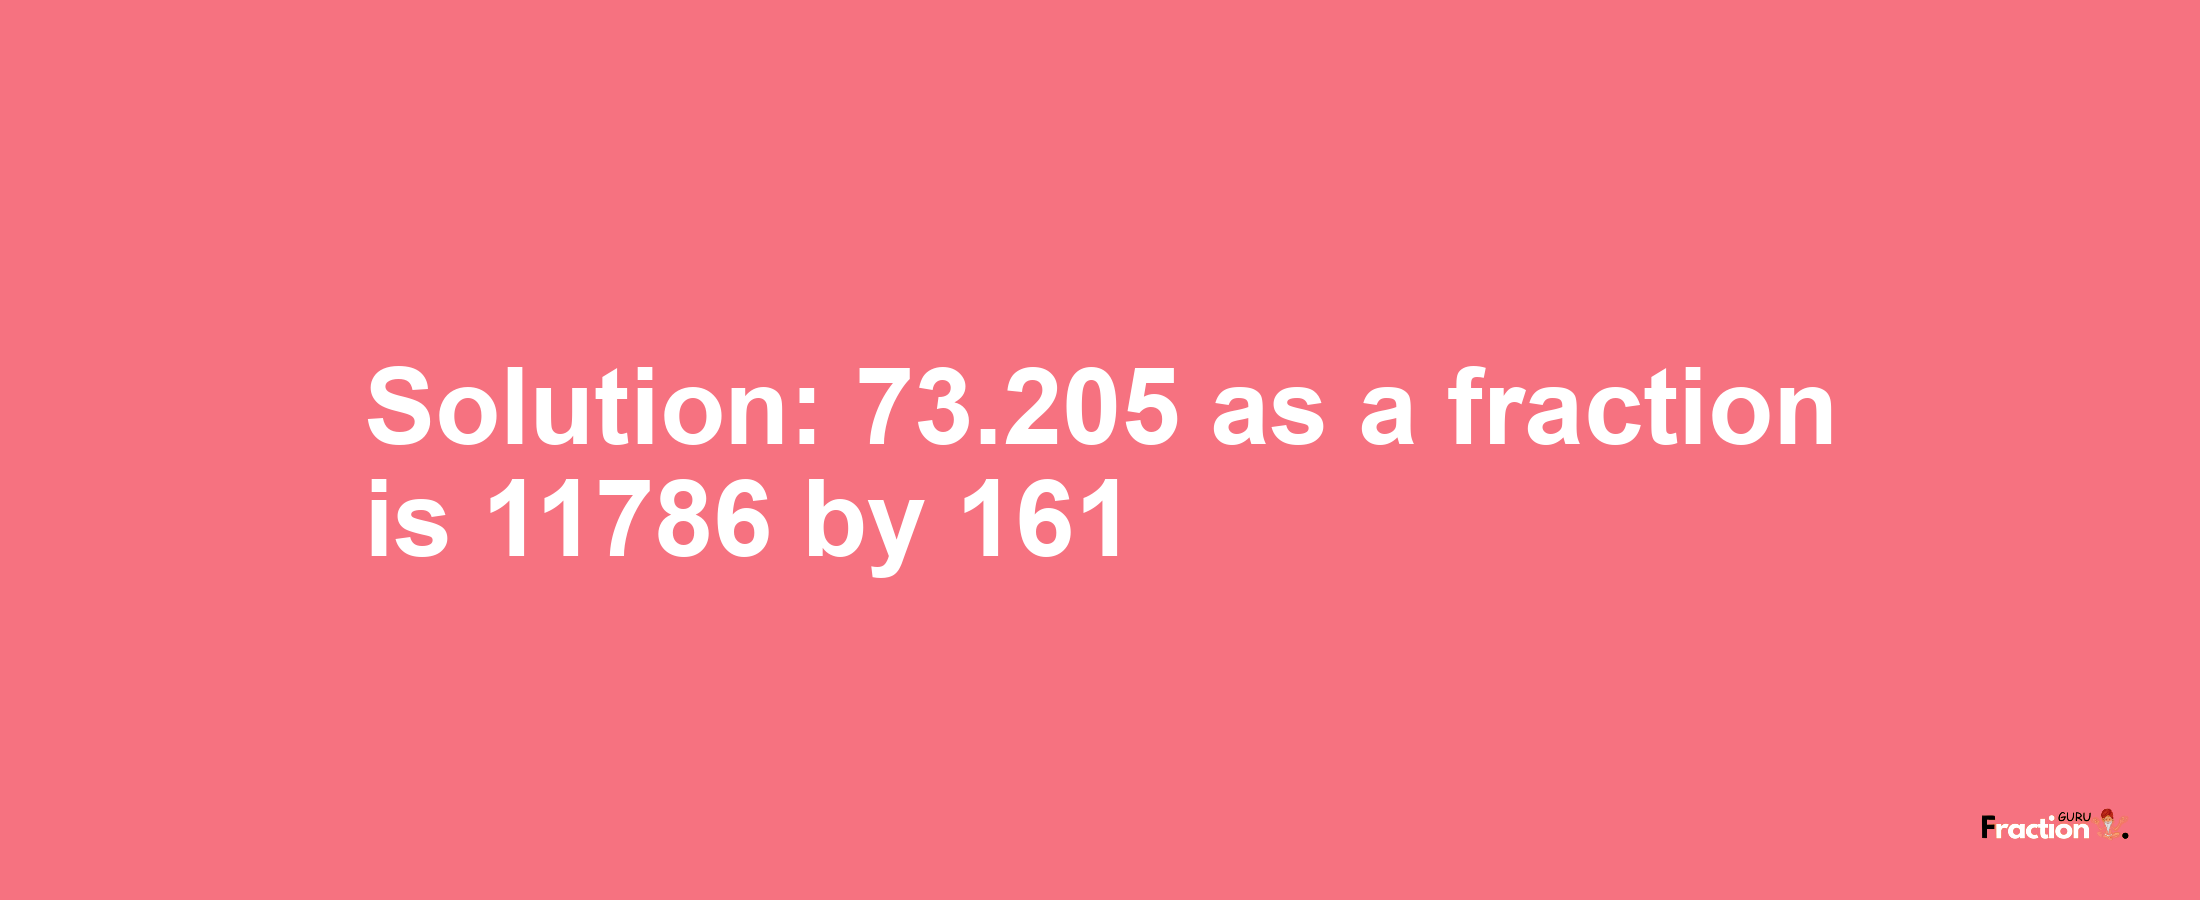 Solution:73.205 as a fraction is 11786/161